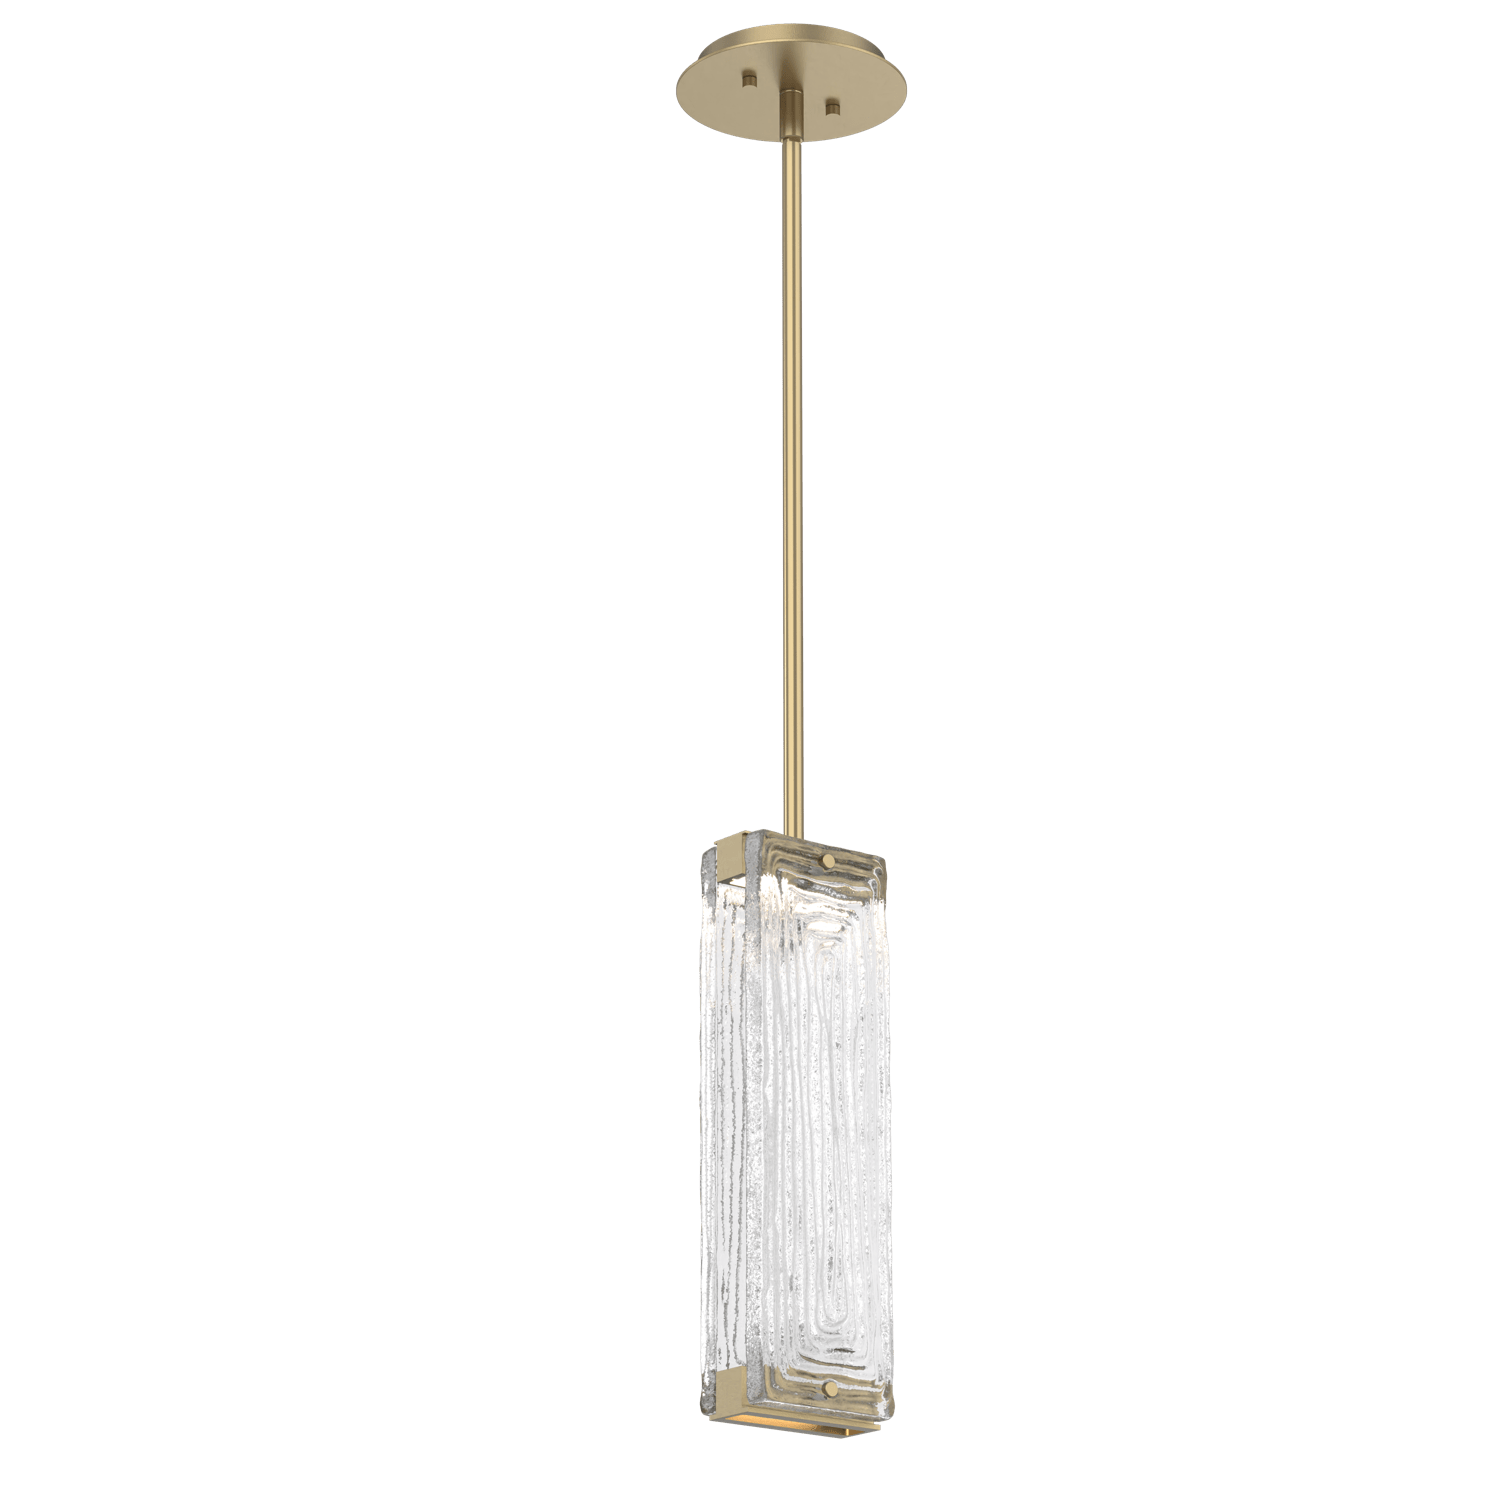 LAB0090-01-GB-TL-Hammerton-Studio-Tabulo-pendant-light-with-gilded-brass-finish-and-clear-linea-cast-glass-shade-and-LED-lamping